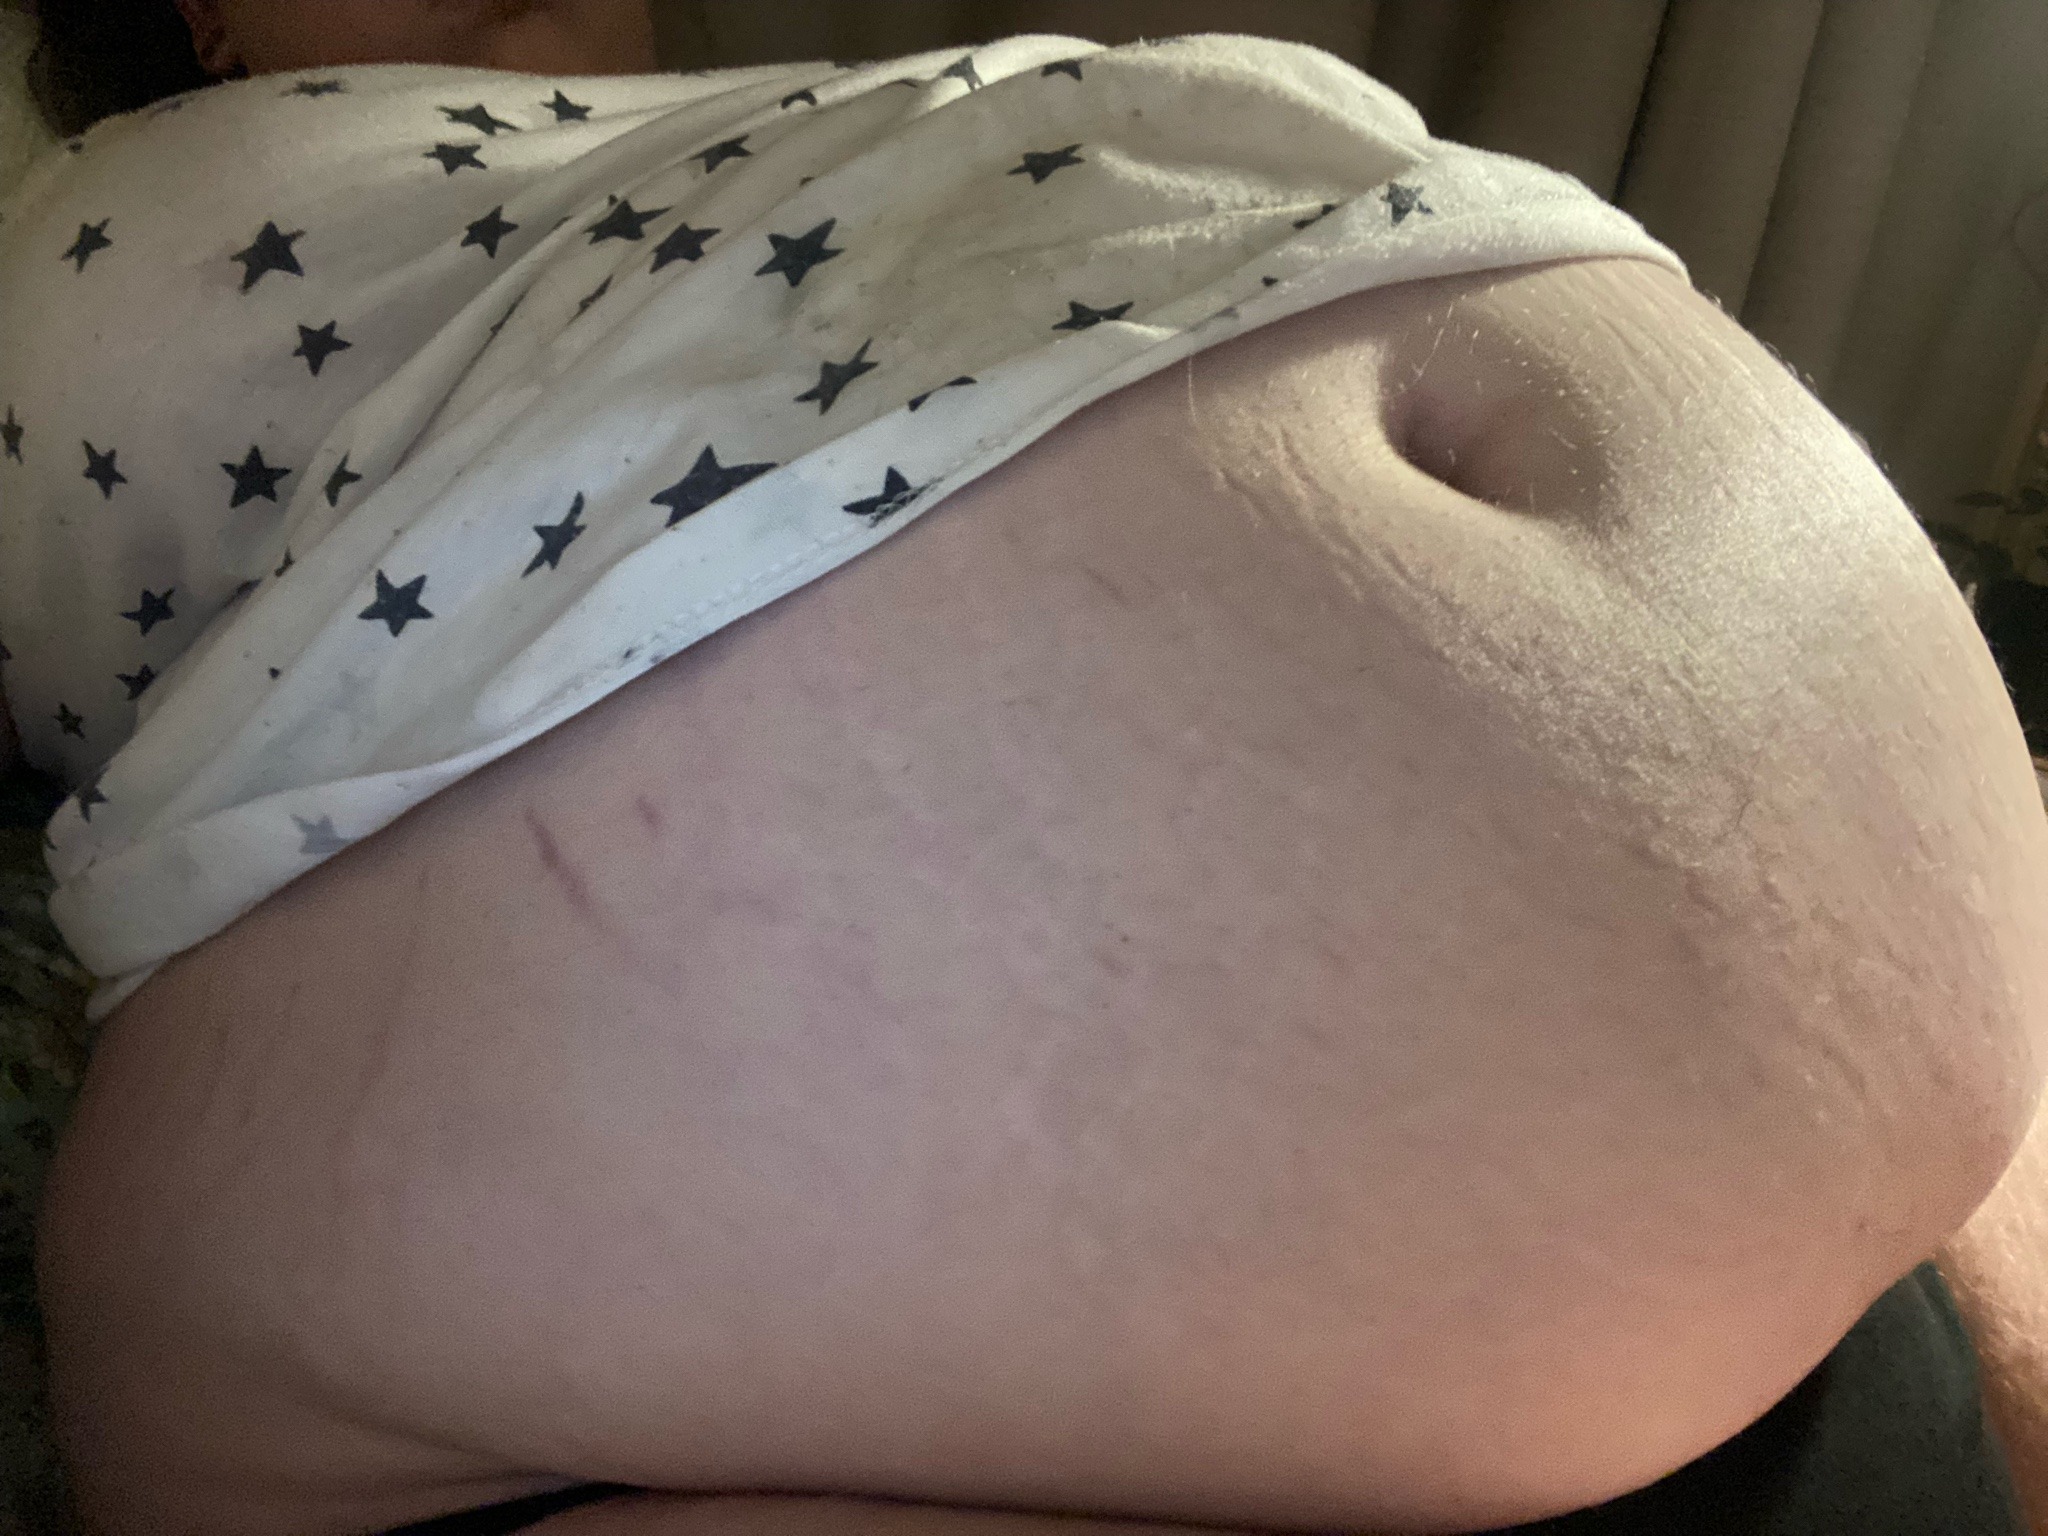 XXX thicquex:A timeline of how I blew up my poor photo